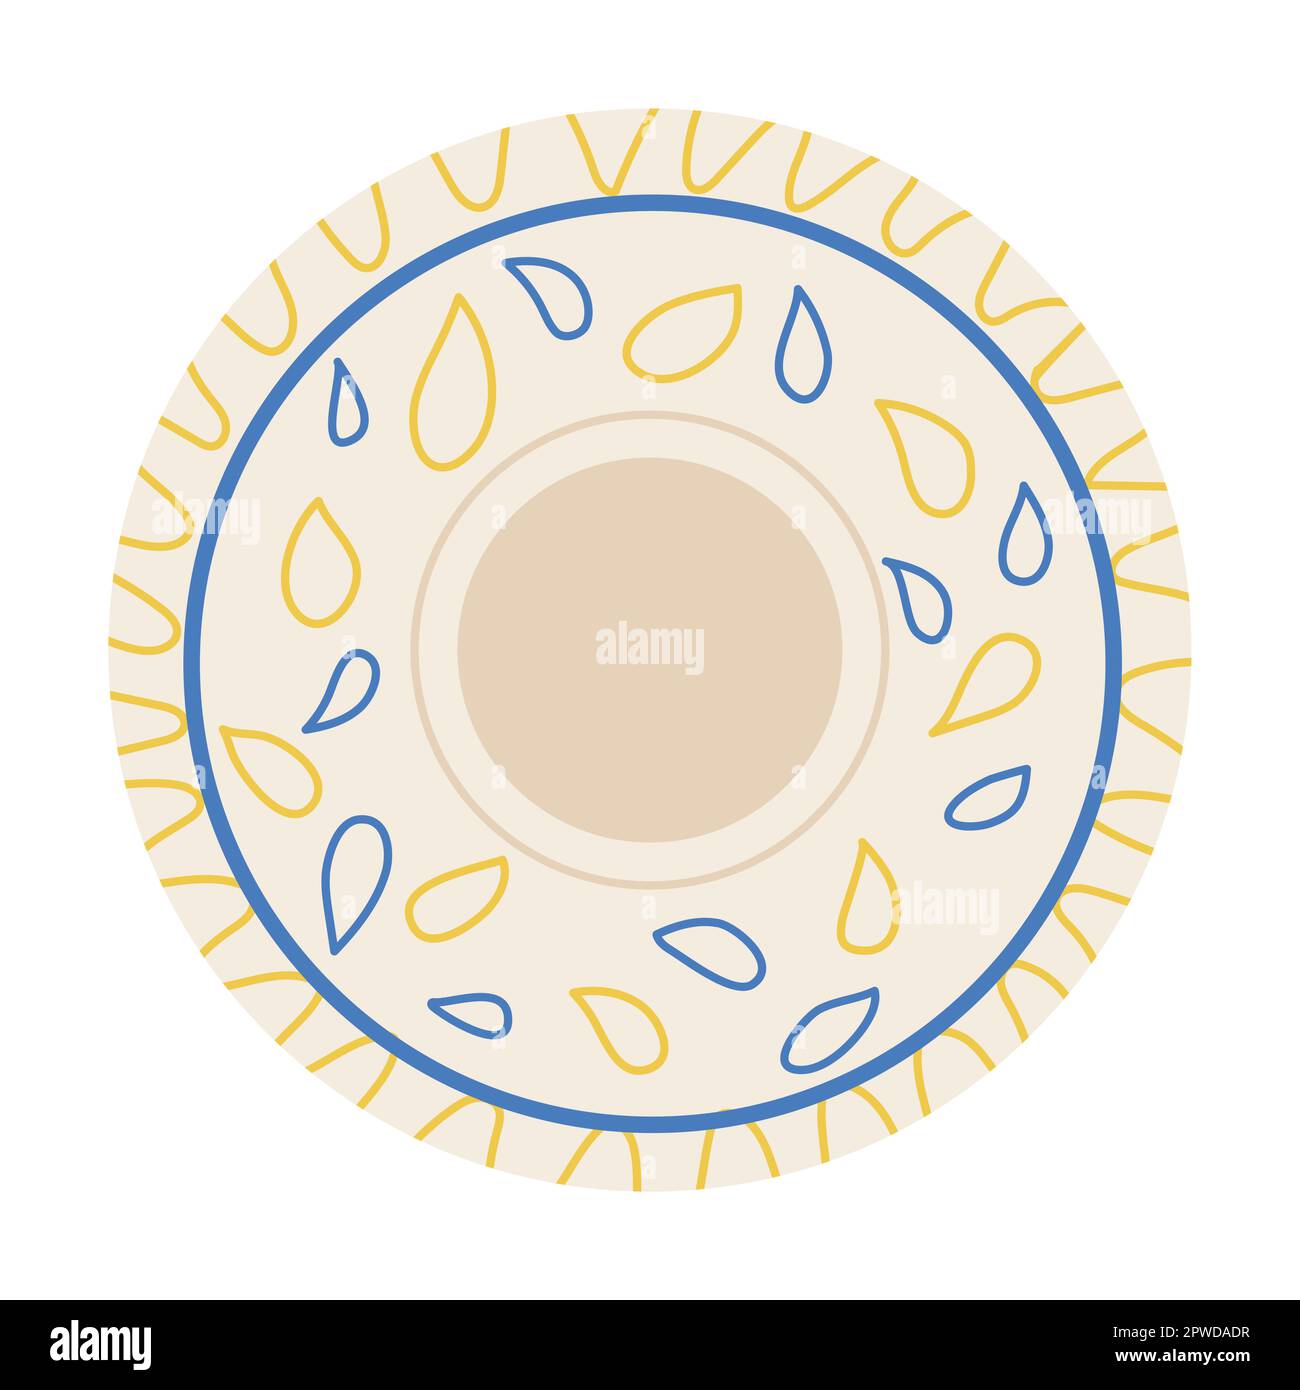 Round plate for home decoration on white background. Ceramic household pottery for kitchen Stock Vector